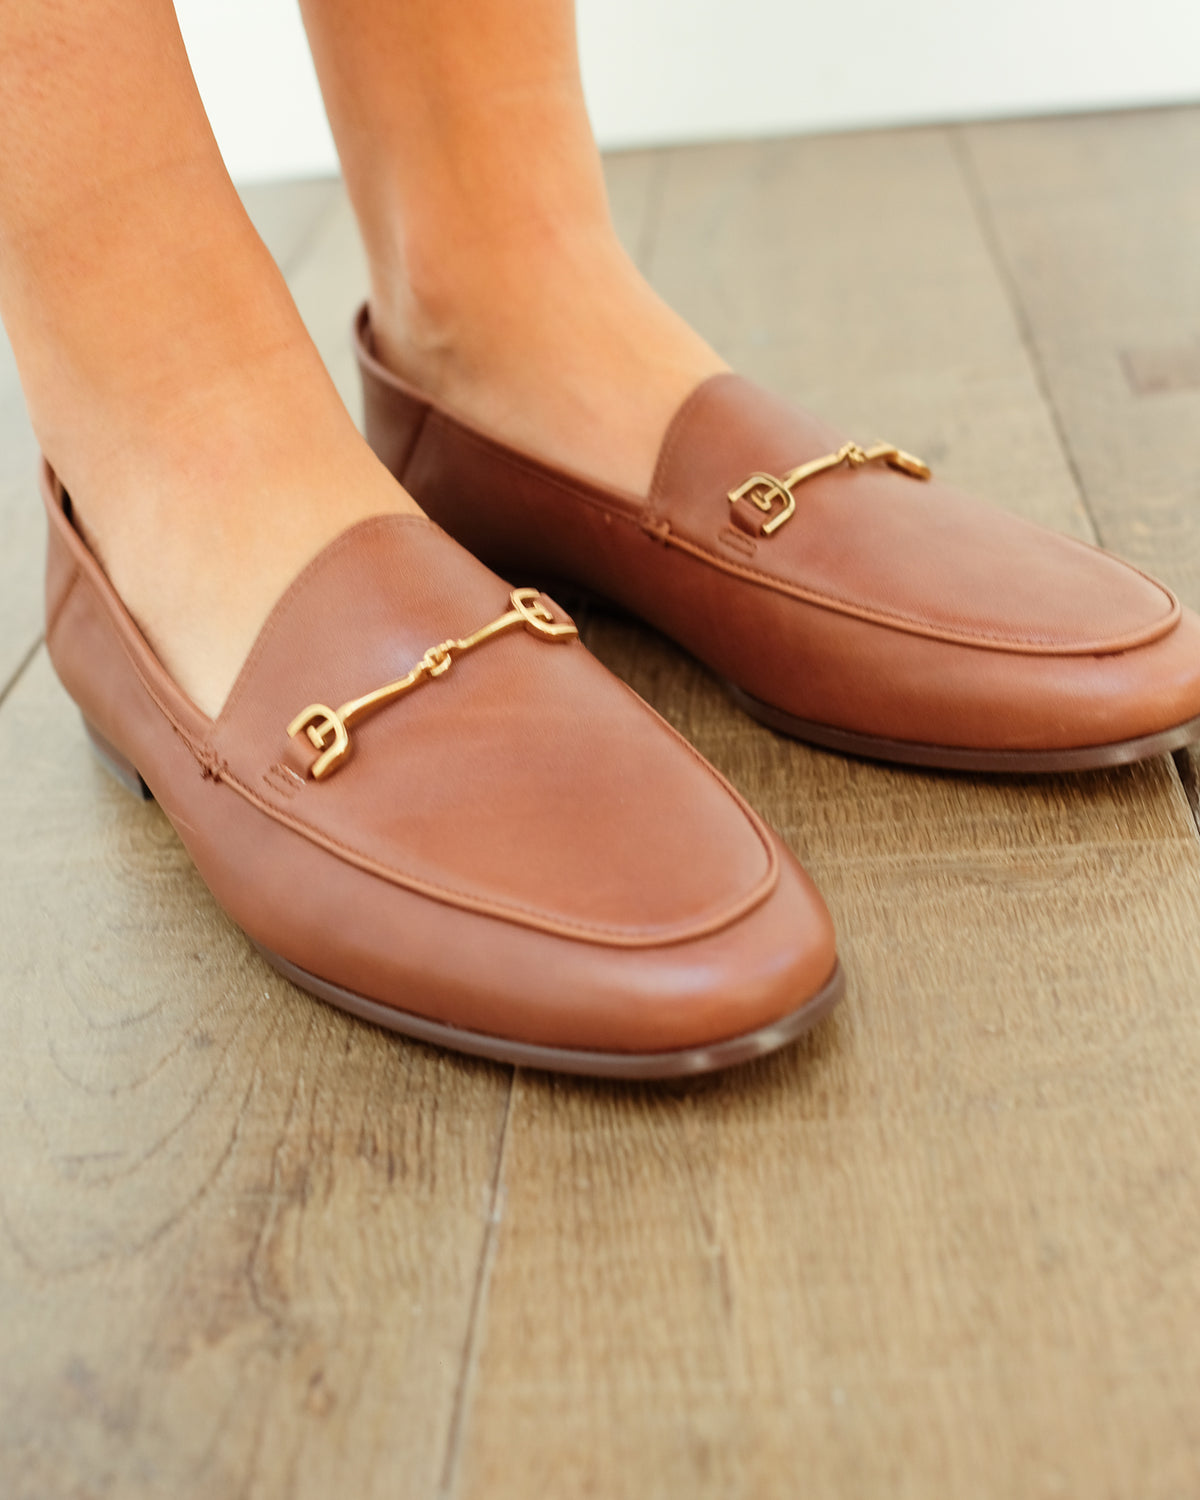 SE Lorraine Loafer in Toasted Coconut